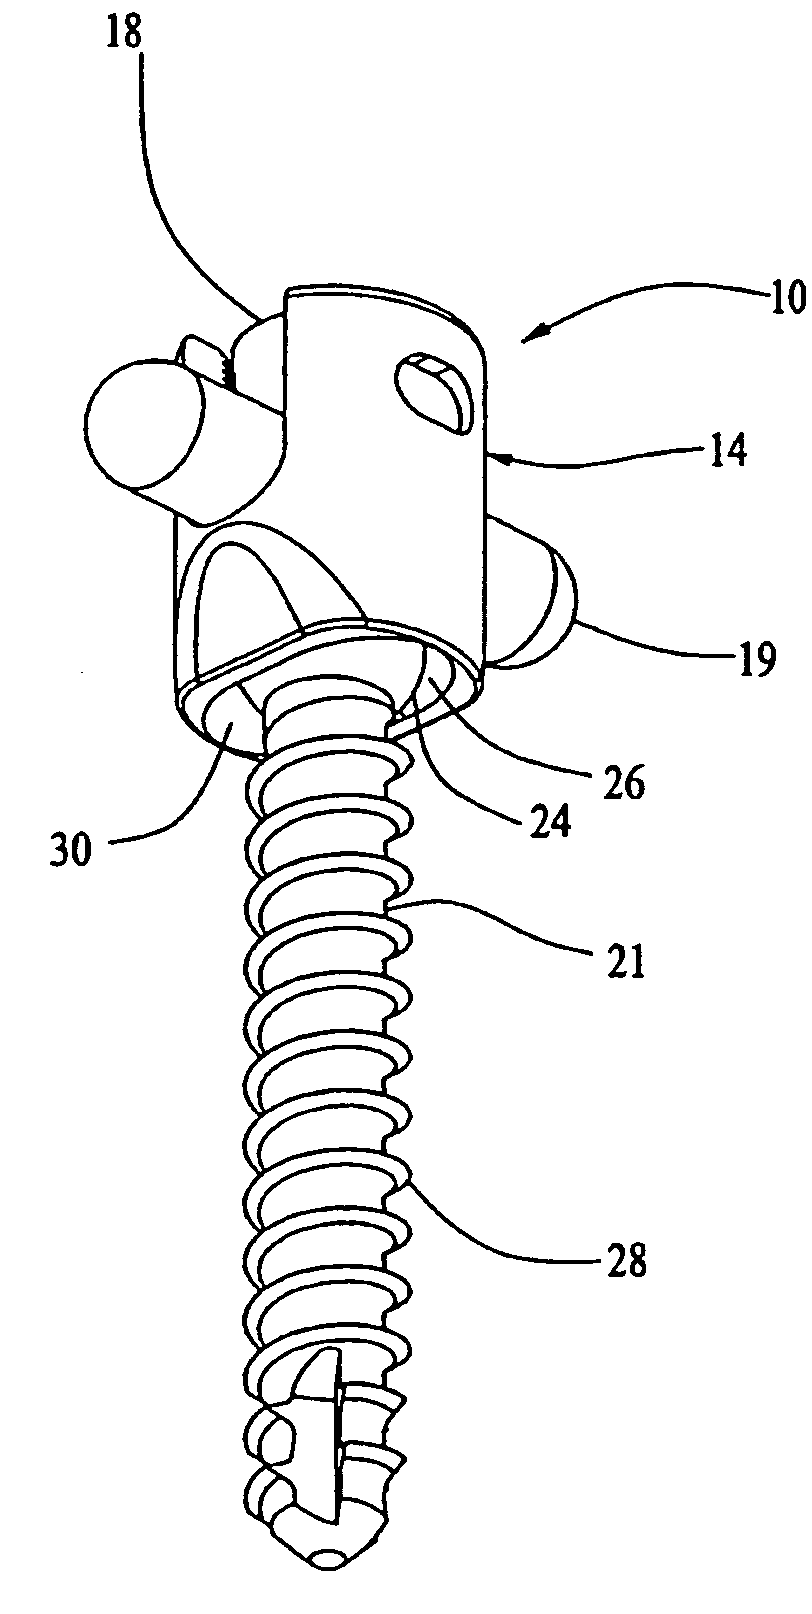 Variable angle spinal screw assembly